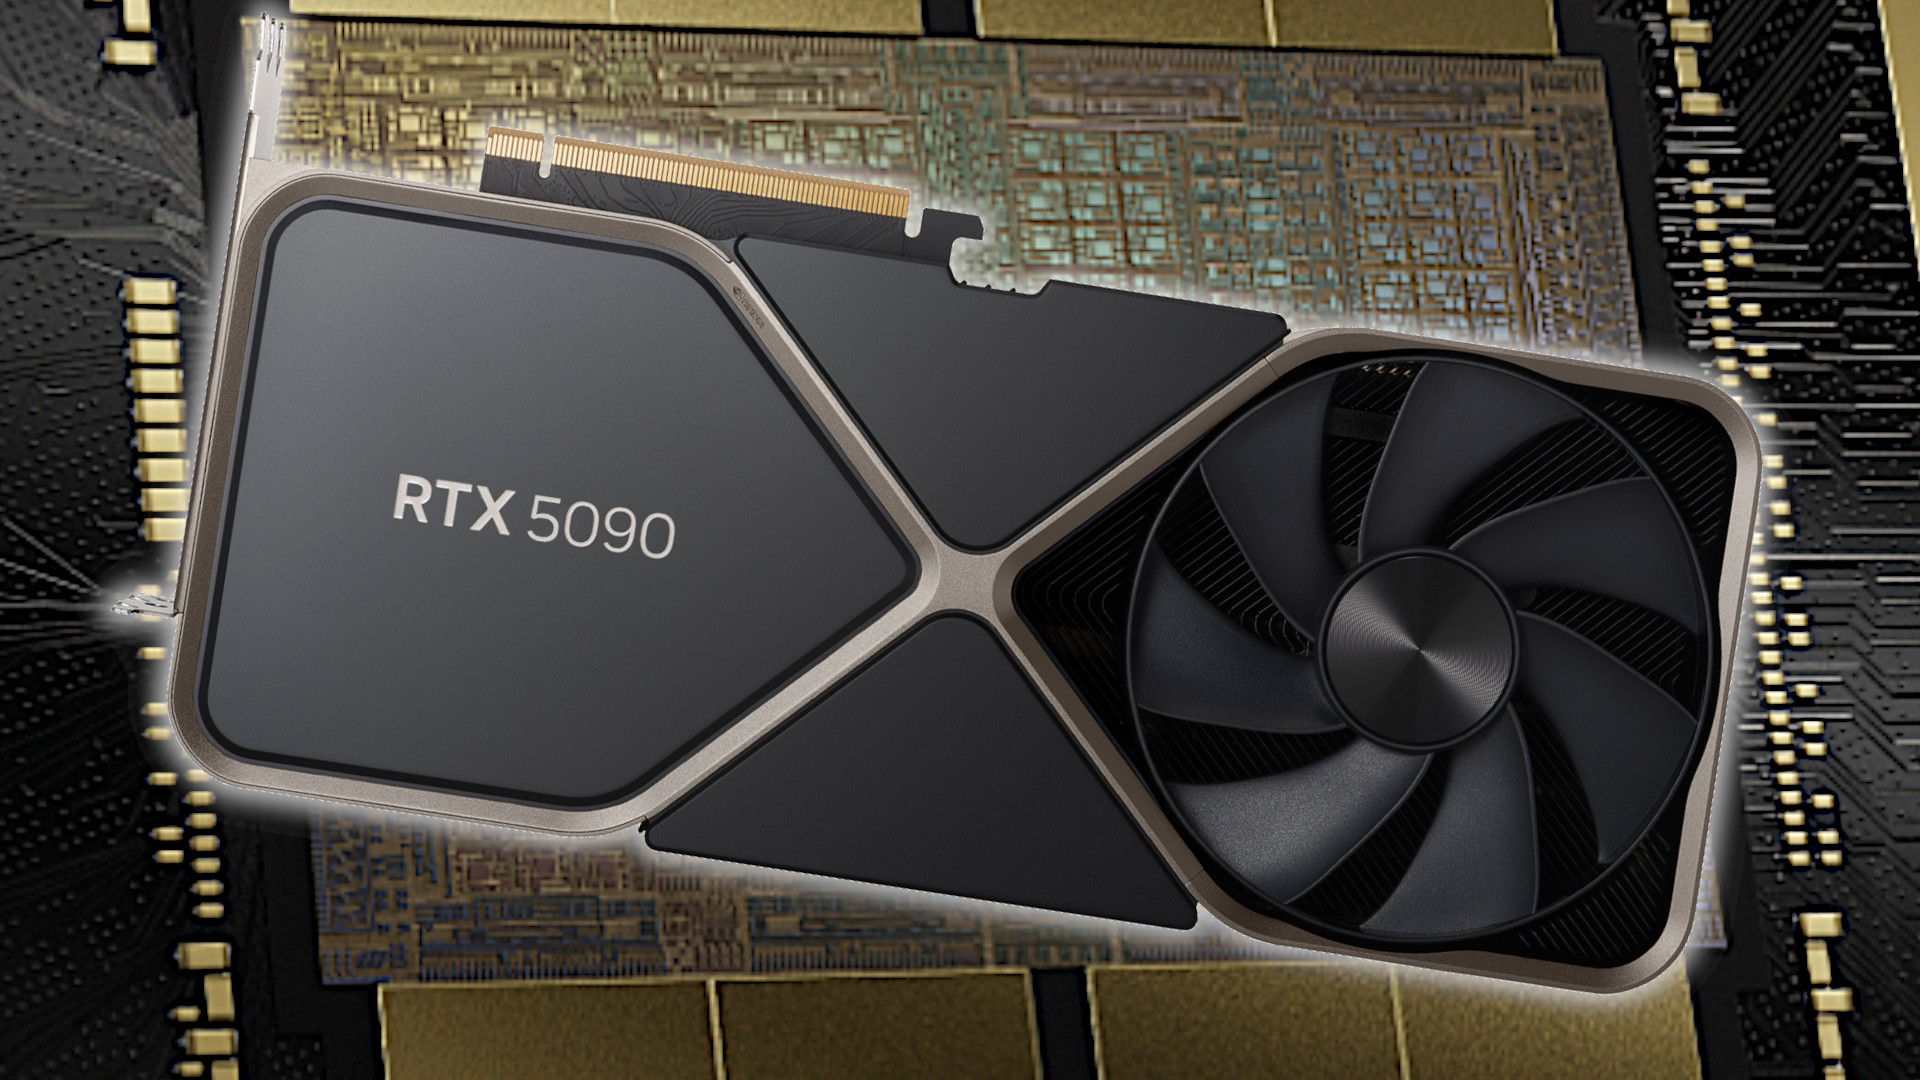 Here's what to expect from the Nvidia RTX 5090 after new GPU reveal